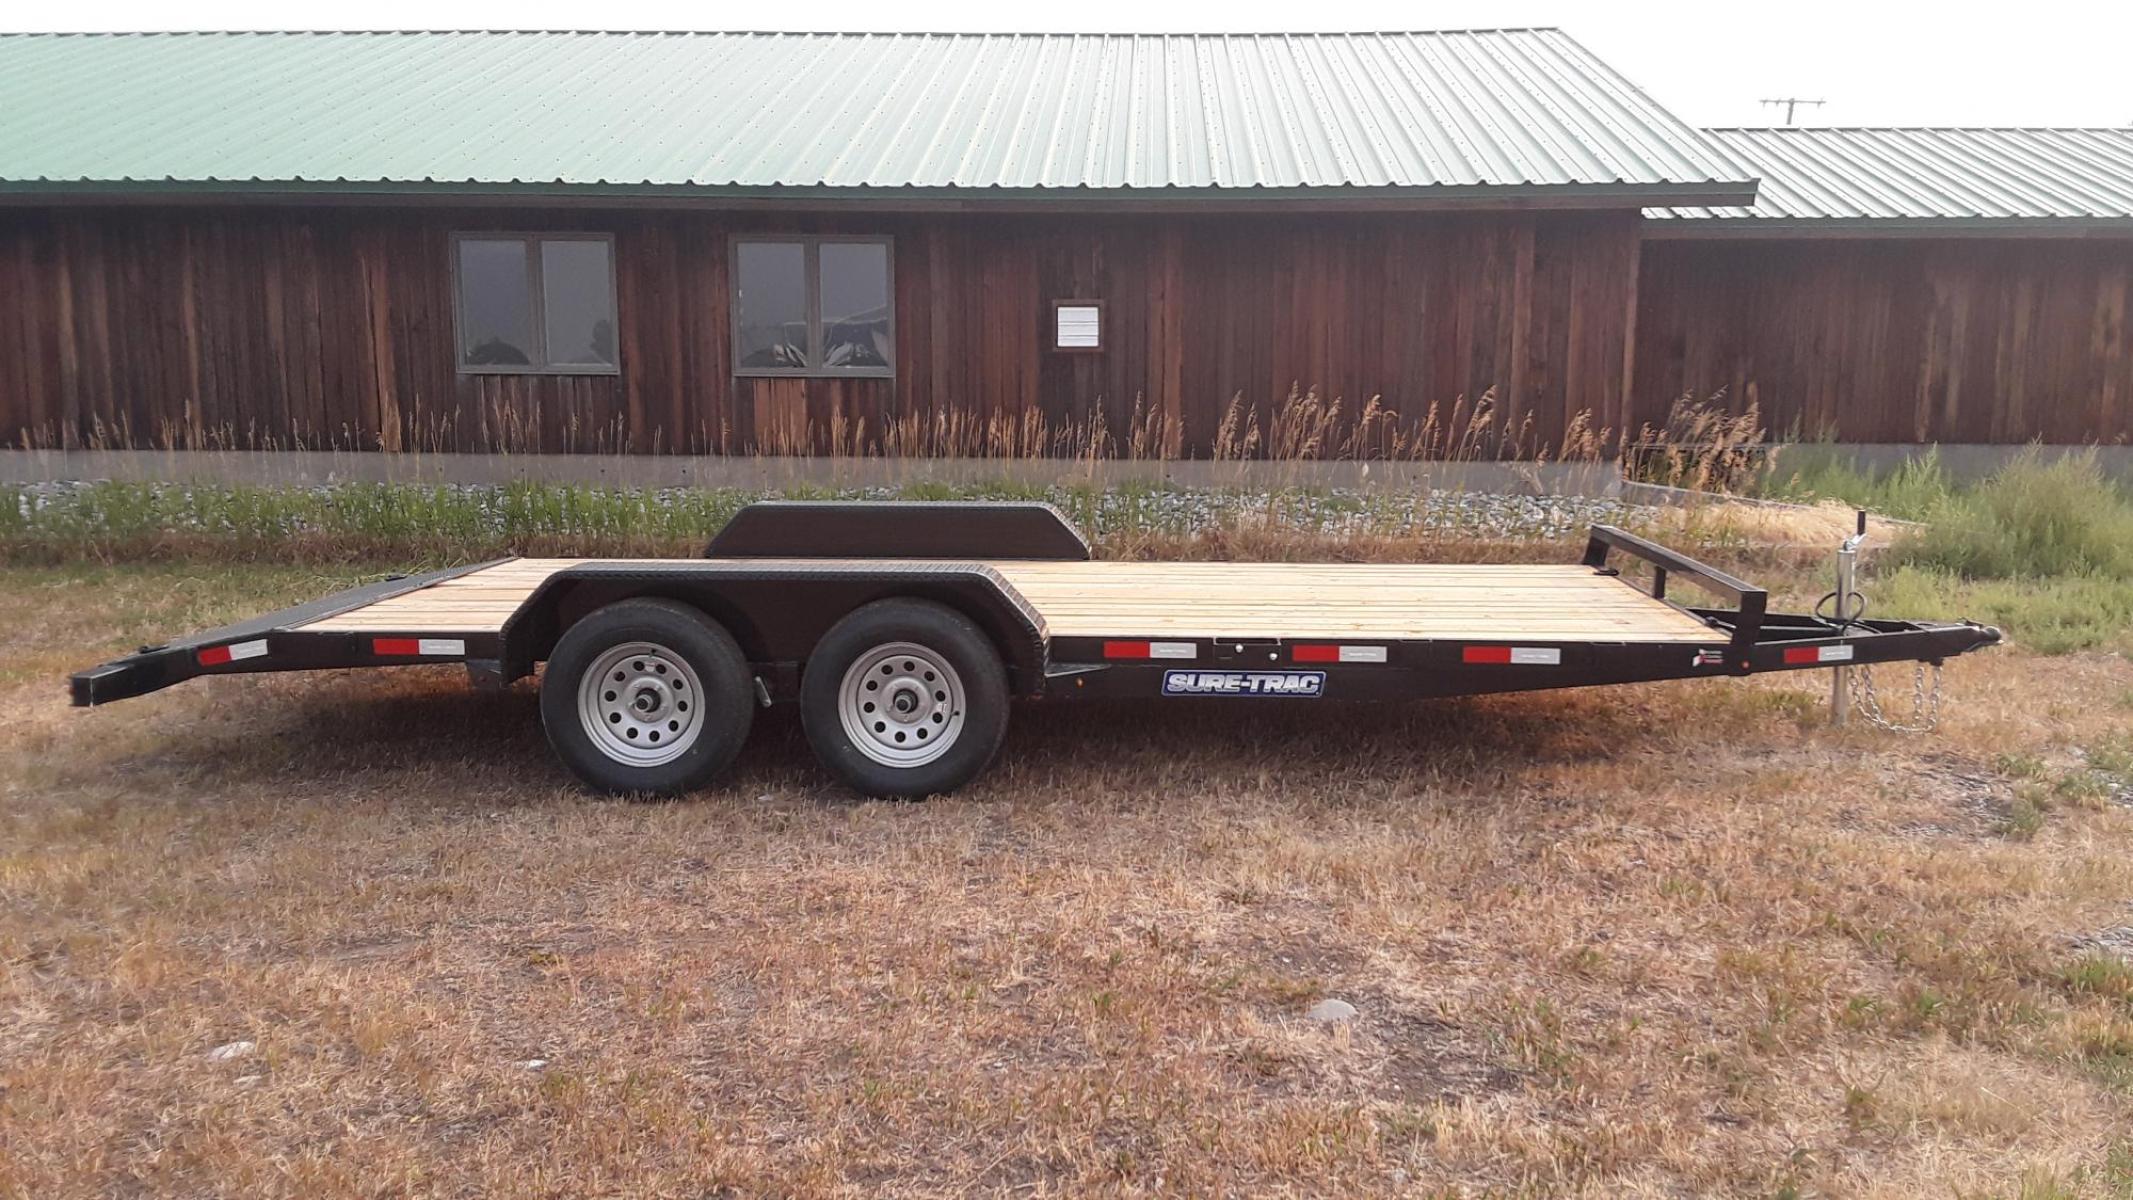 2023 Black SureTrac 7 x 18 - 7K Car Hauler , located at 310 West 1st Ave, Big Timber, MT, 59011, (406) 860-8510, 45.833511, -109.957809 - SURE-TRAC 7 X 18 C-CHANNEL CAR HAULER, 7K GVW, ELECTRIC BRAKES BOTH AXLES, REAR STOW RAMPS, LED LIGHTS, TREATED WOOD DECK, POWDER COAT FINISH, REMOVABLE FENDER ON DRIVERS SIDE, (4) D-RING TIE DOWNS, STAKE POCKETS, 2' TREAD PLATE DOVETAIL, EZ LUBE HUBS, 15' RADIAL TIRES, SPRING SUSPENSION, SPARE MOUN - Photo #1